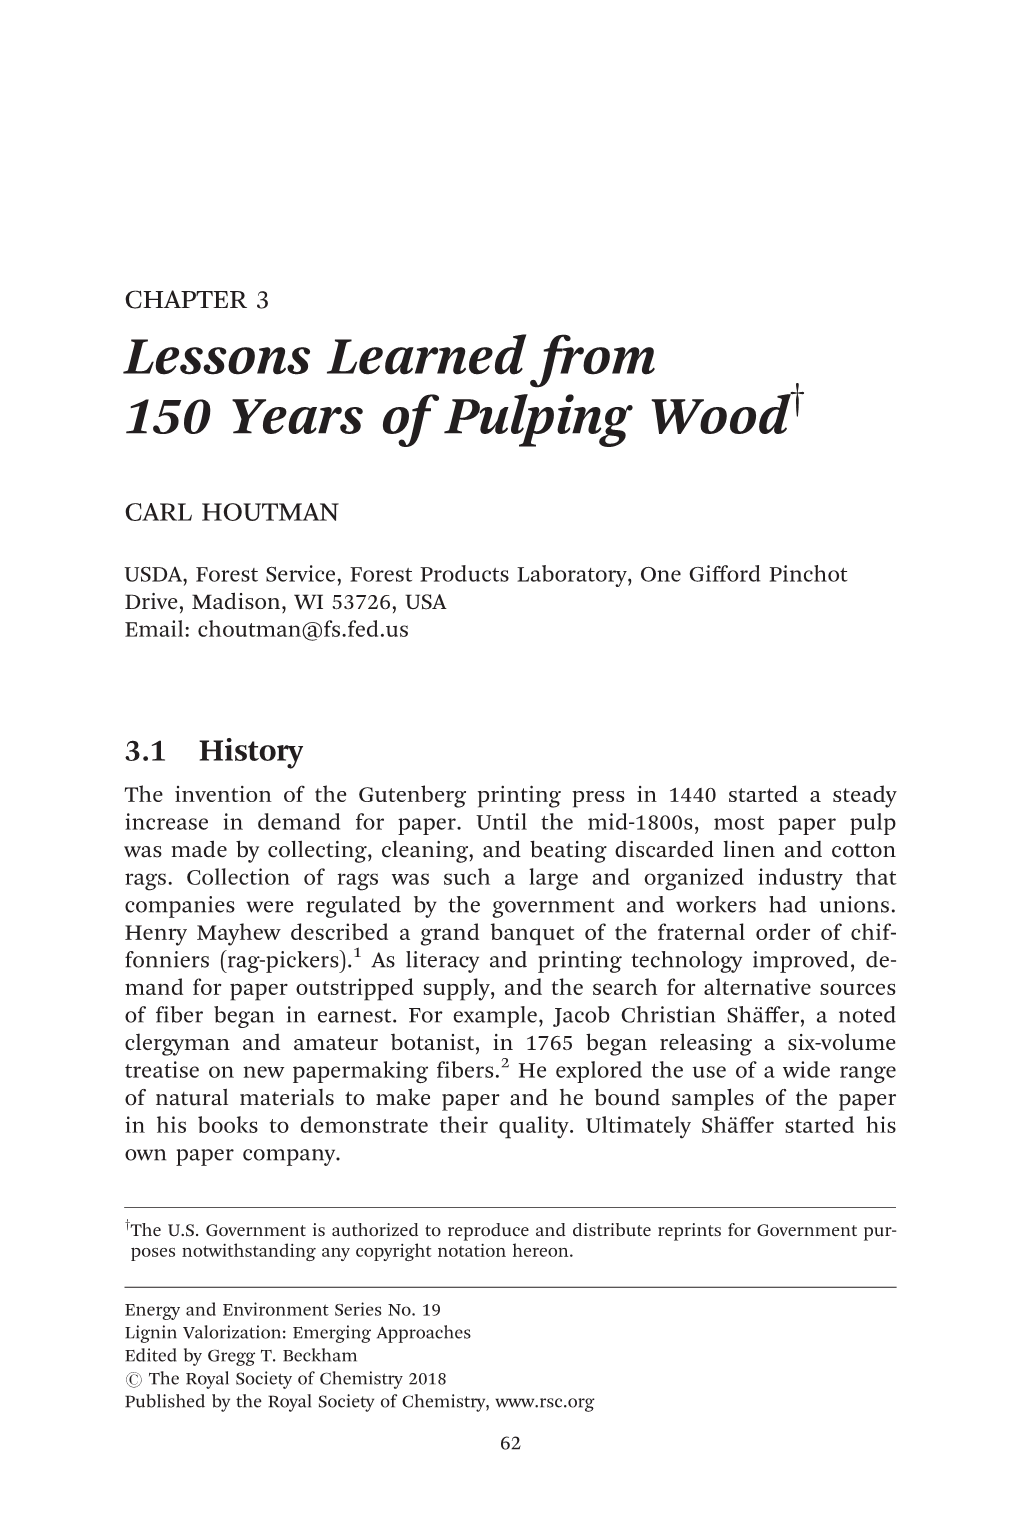 Lessons Learned from 150 Years of Pulping Woody